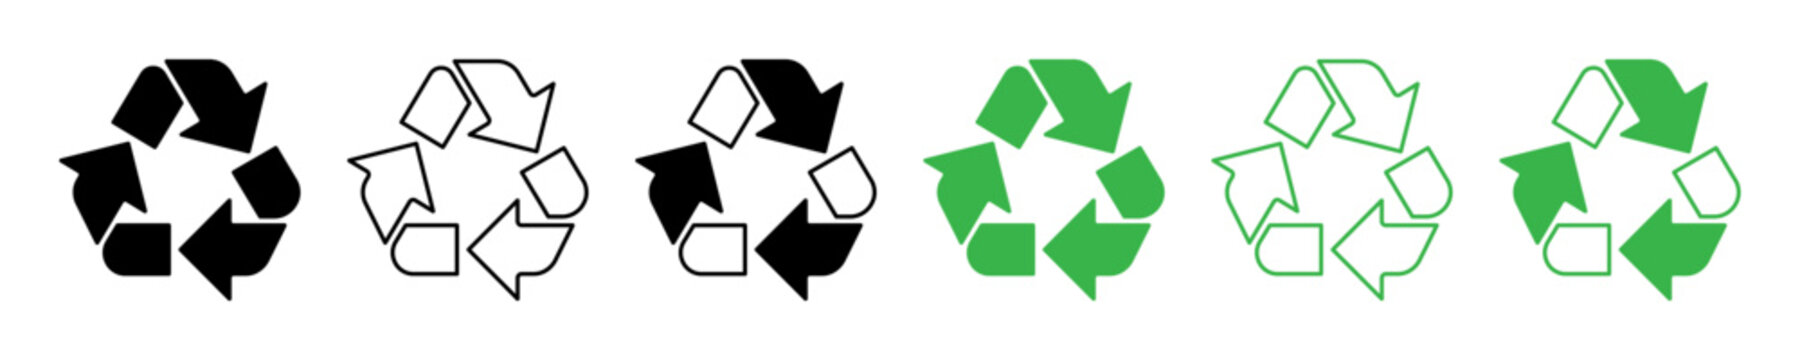 Recycle Symbol Icon Vector Illustration. Set of Recycle or Reuse Symbol Icons